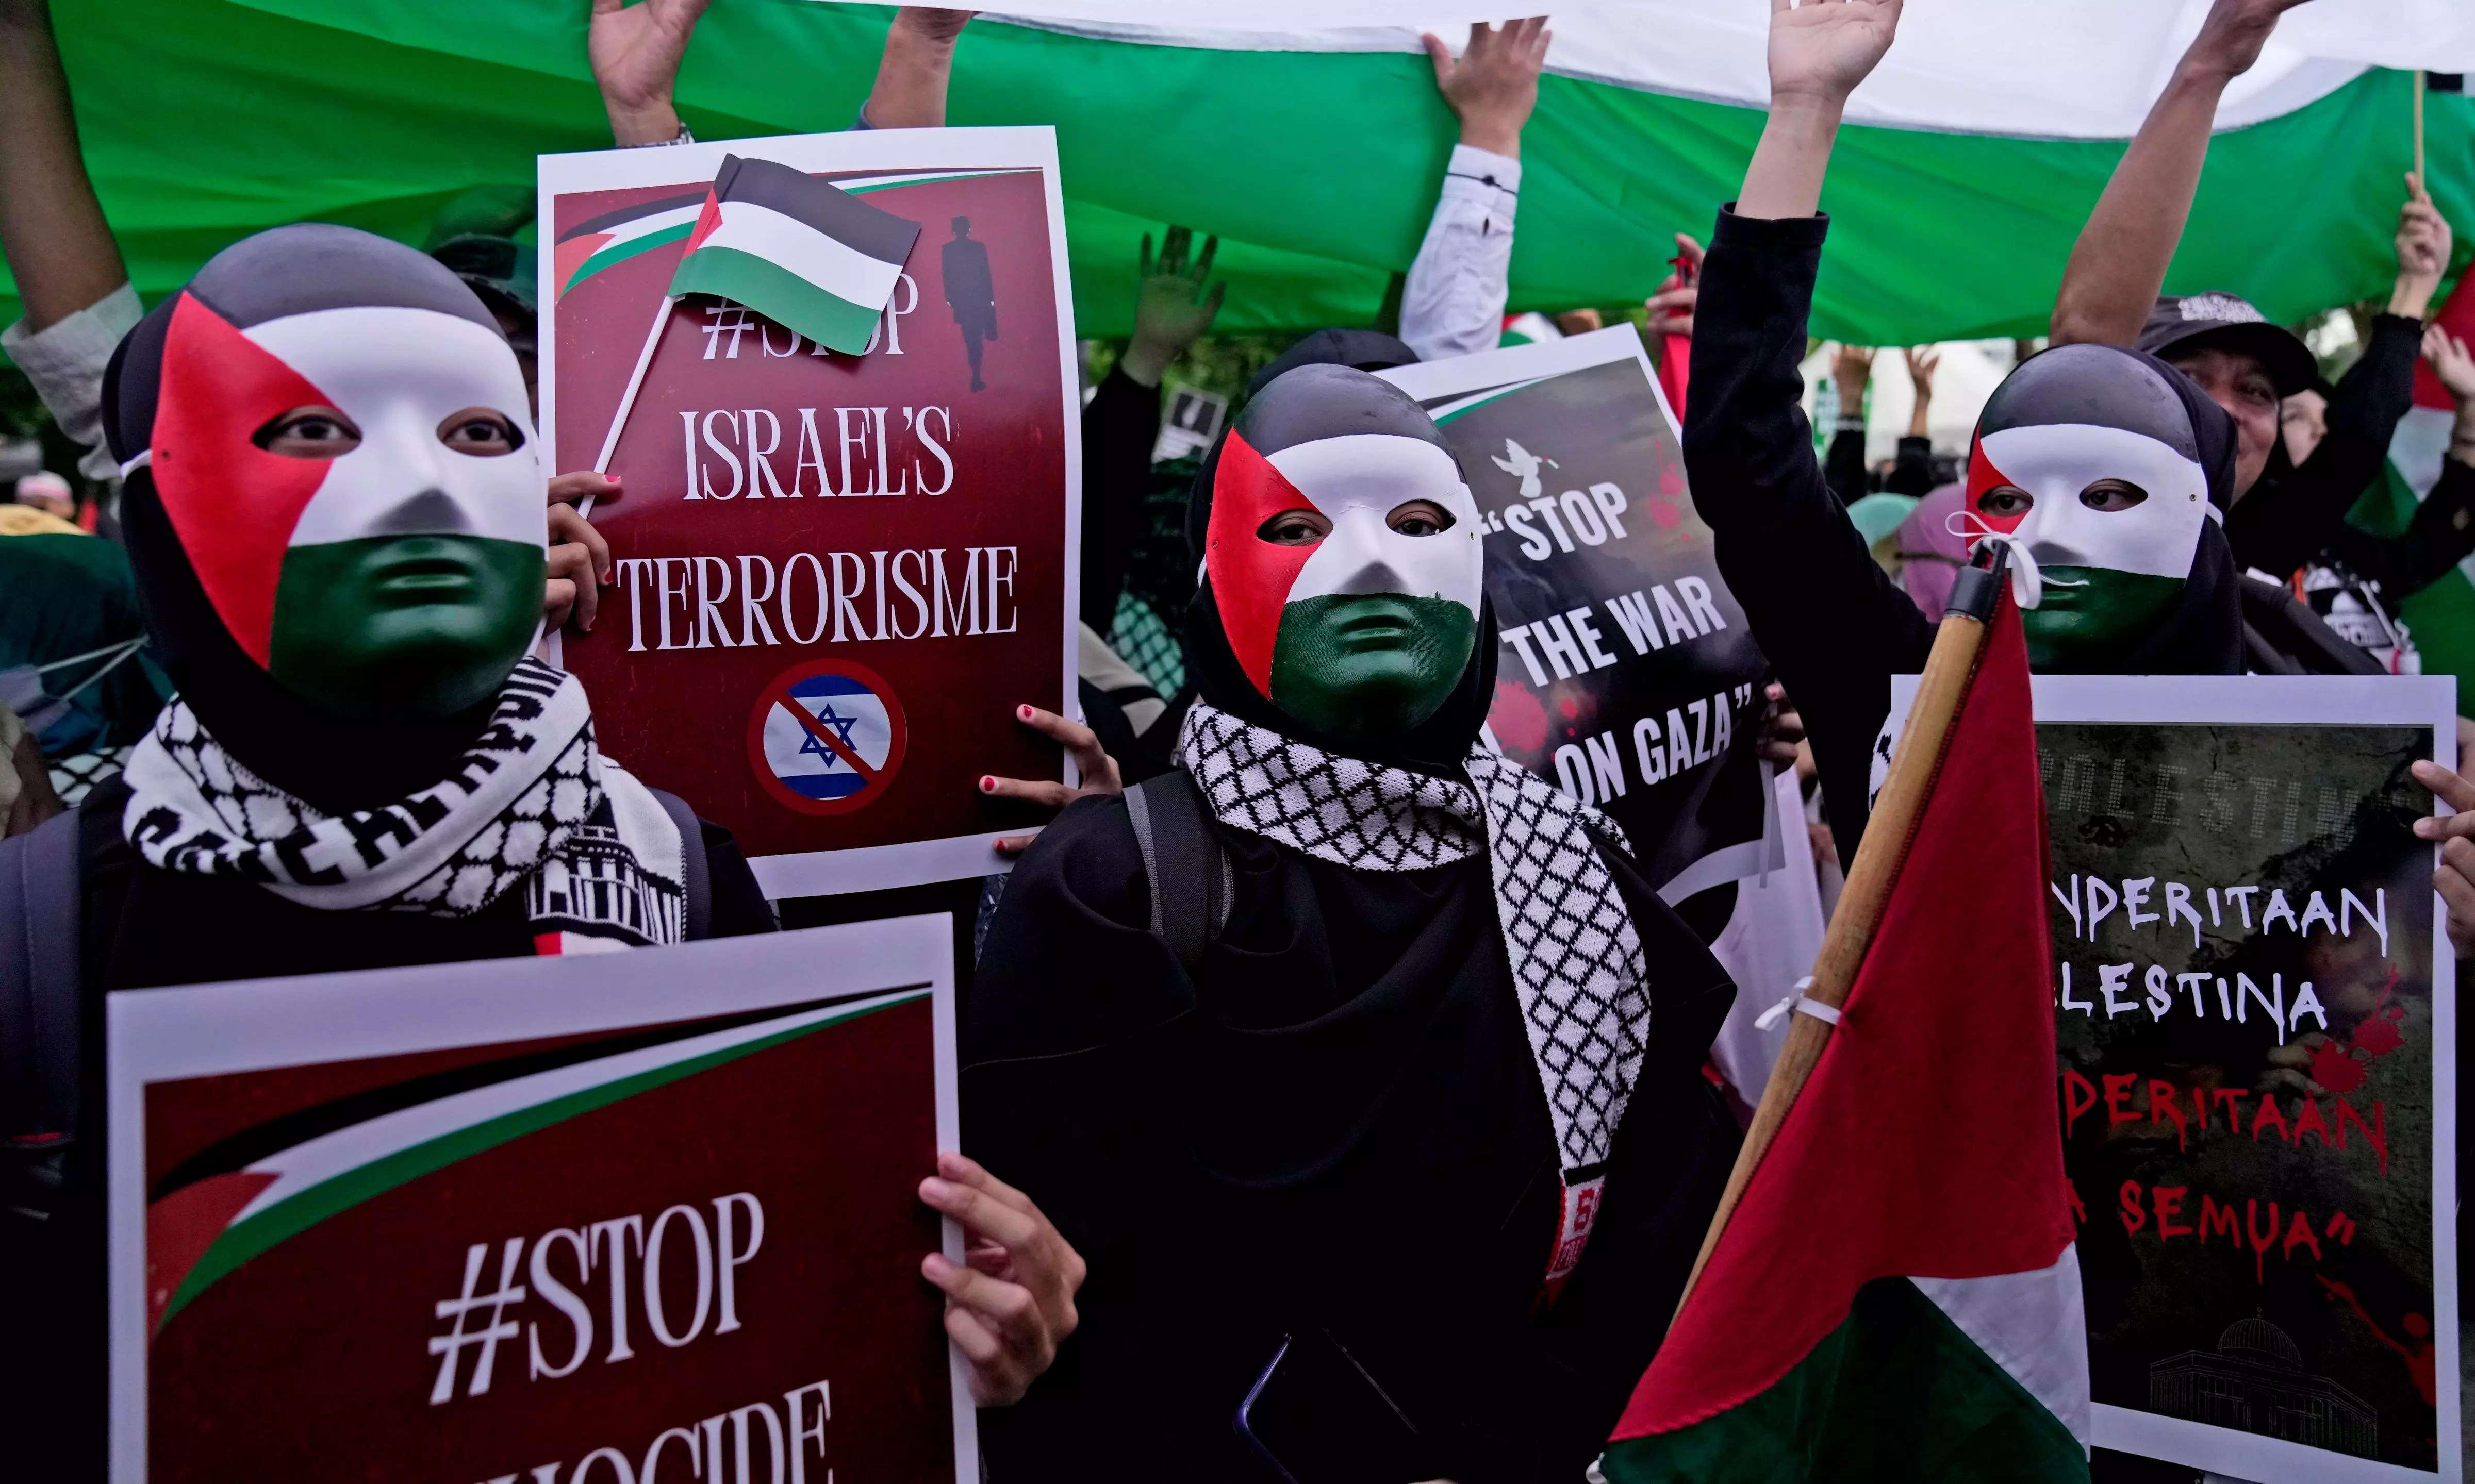 Thousands participate in pro-Palestinian marches during a global day of protests in London, other cities